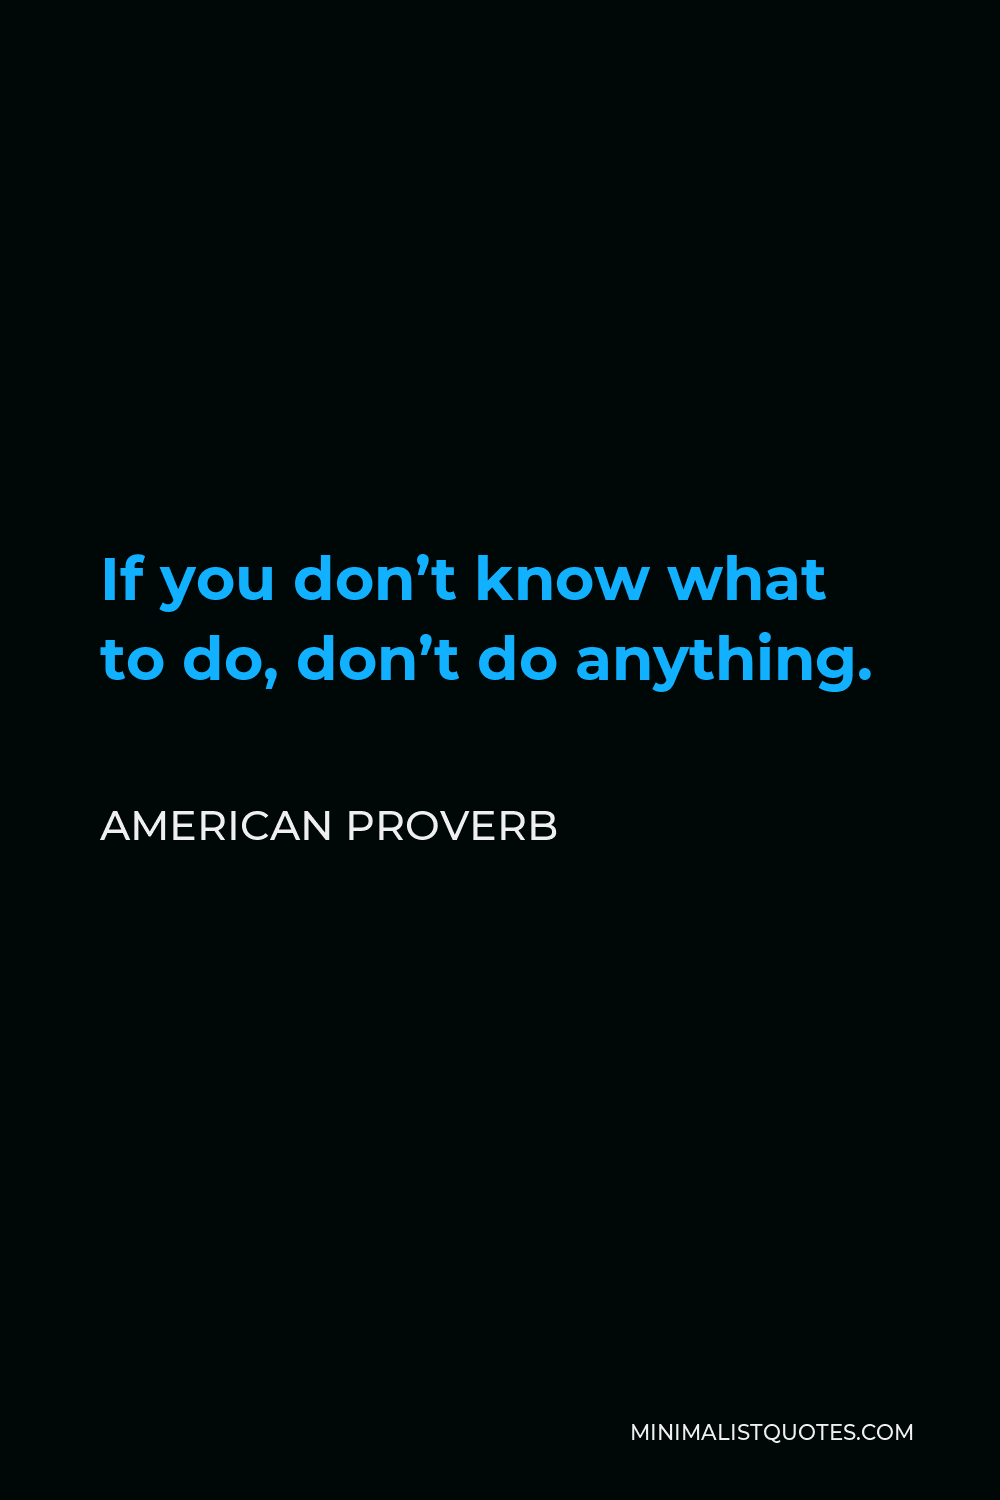 American Proverb Quote - If you don’t know what to do, don’t do anything.